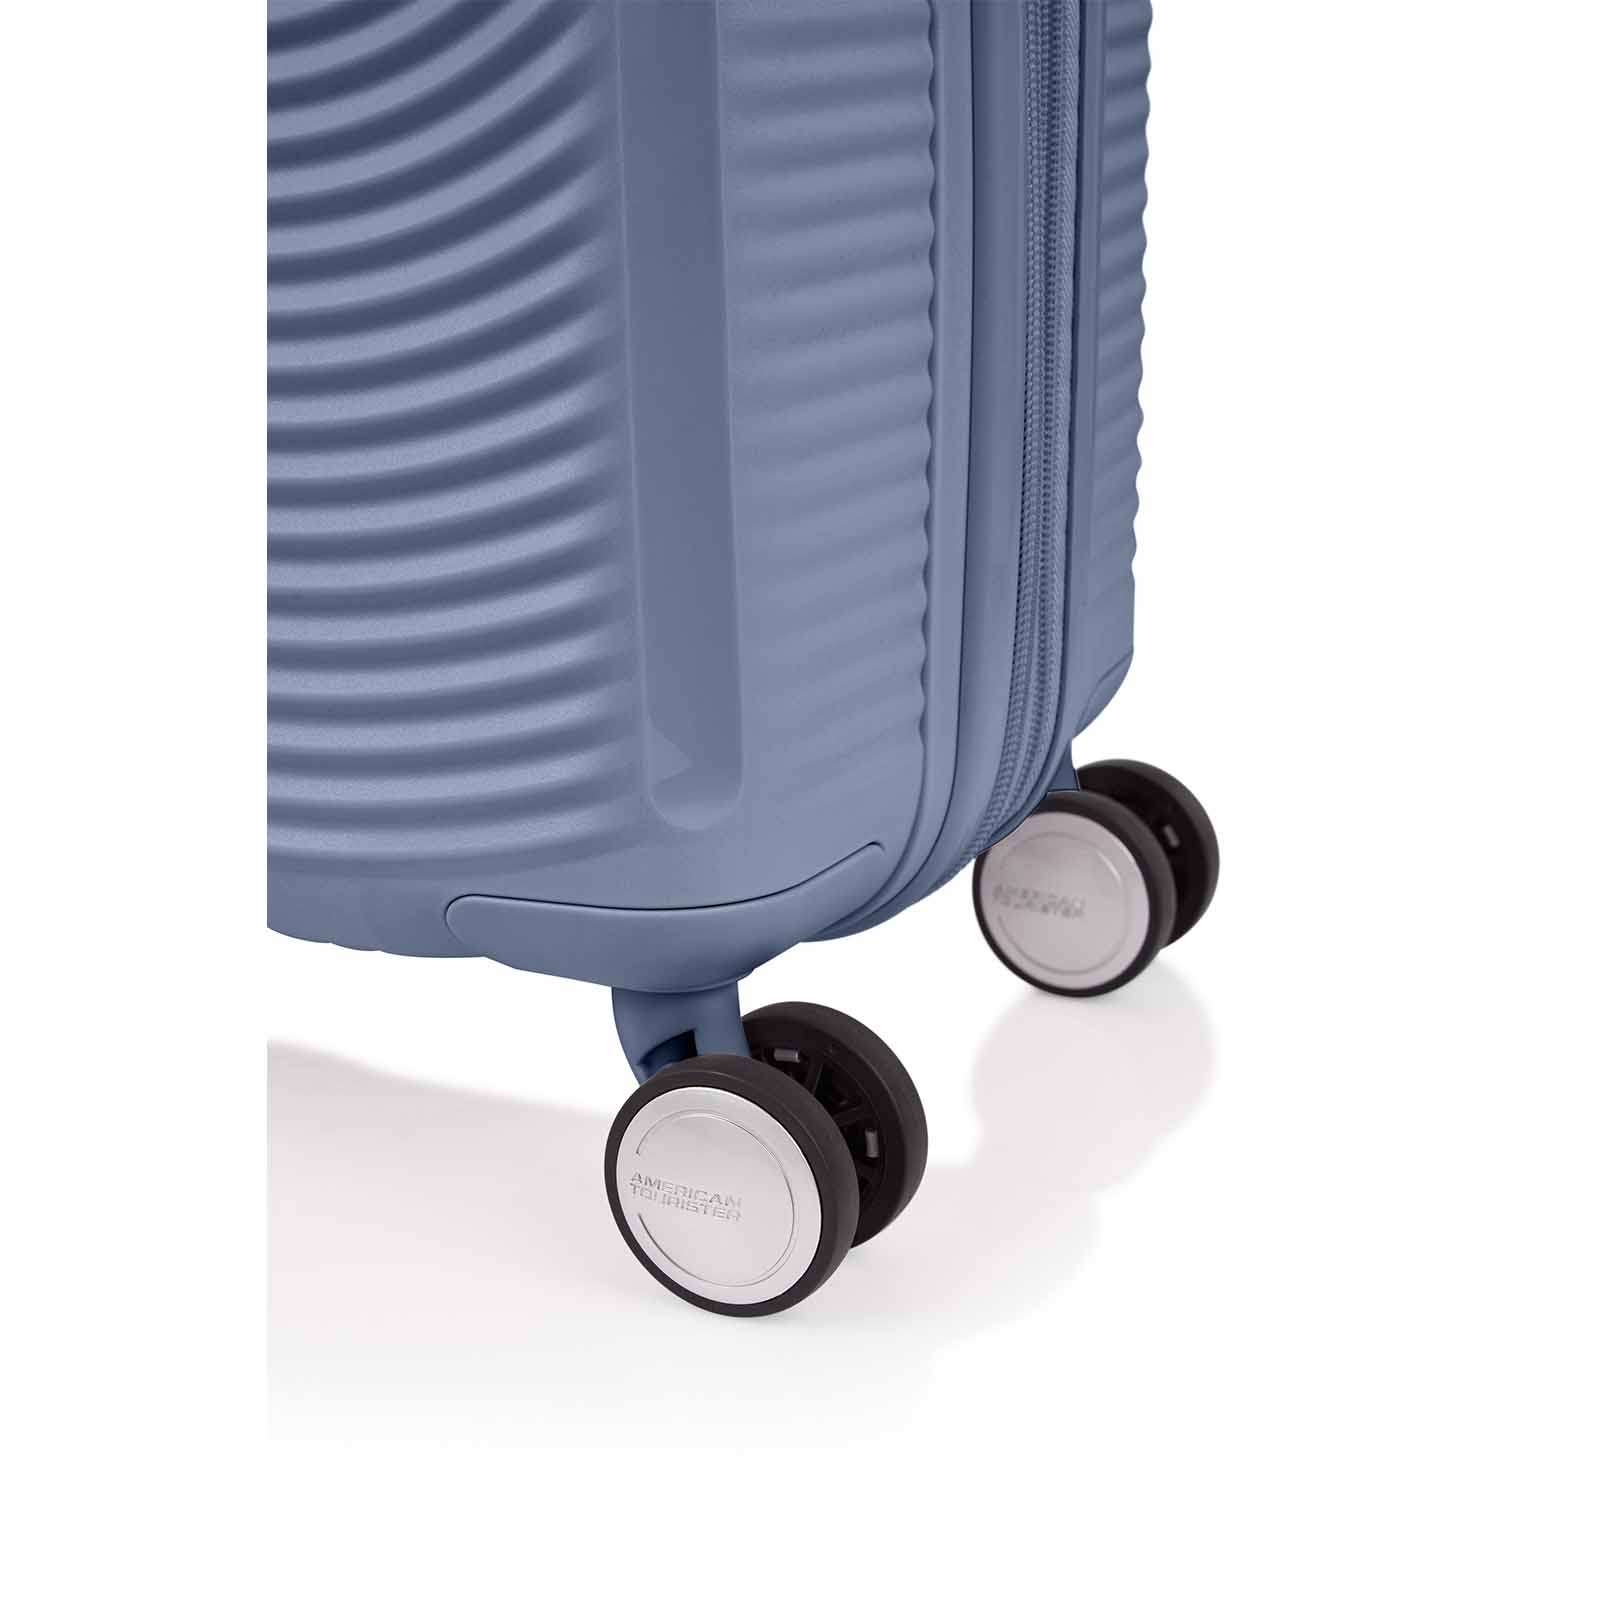 American-Tourister-Curio-2-55cm-Carry-On-Suitcase-Stone-Blue-Wheels